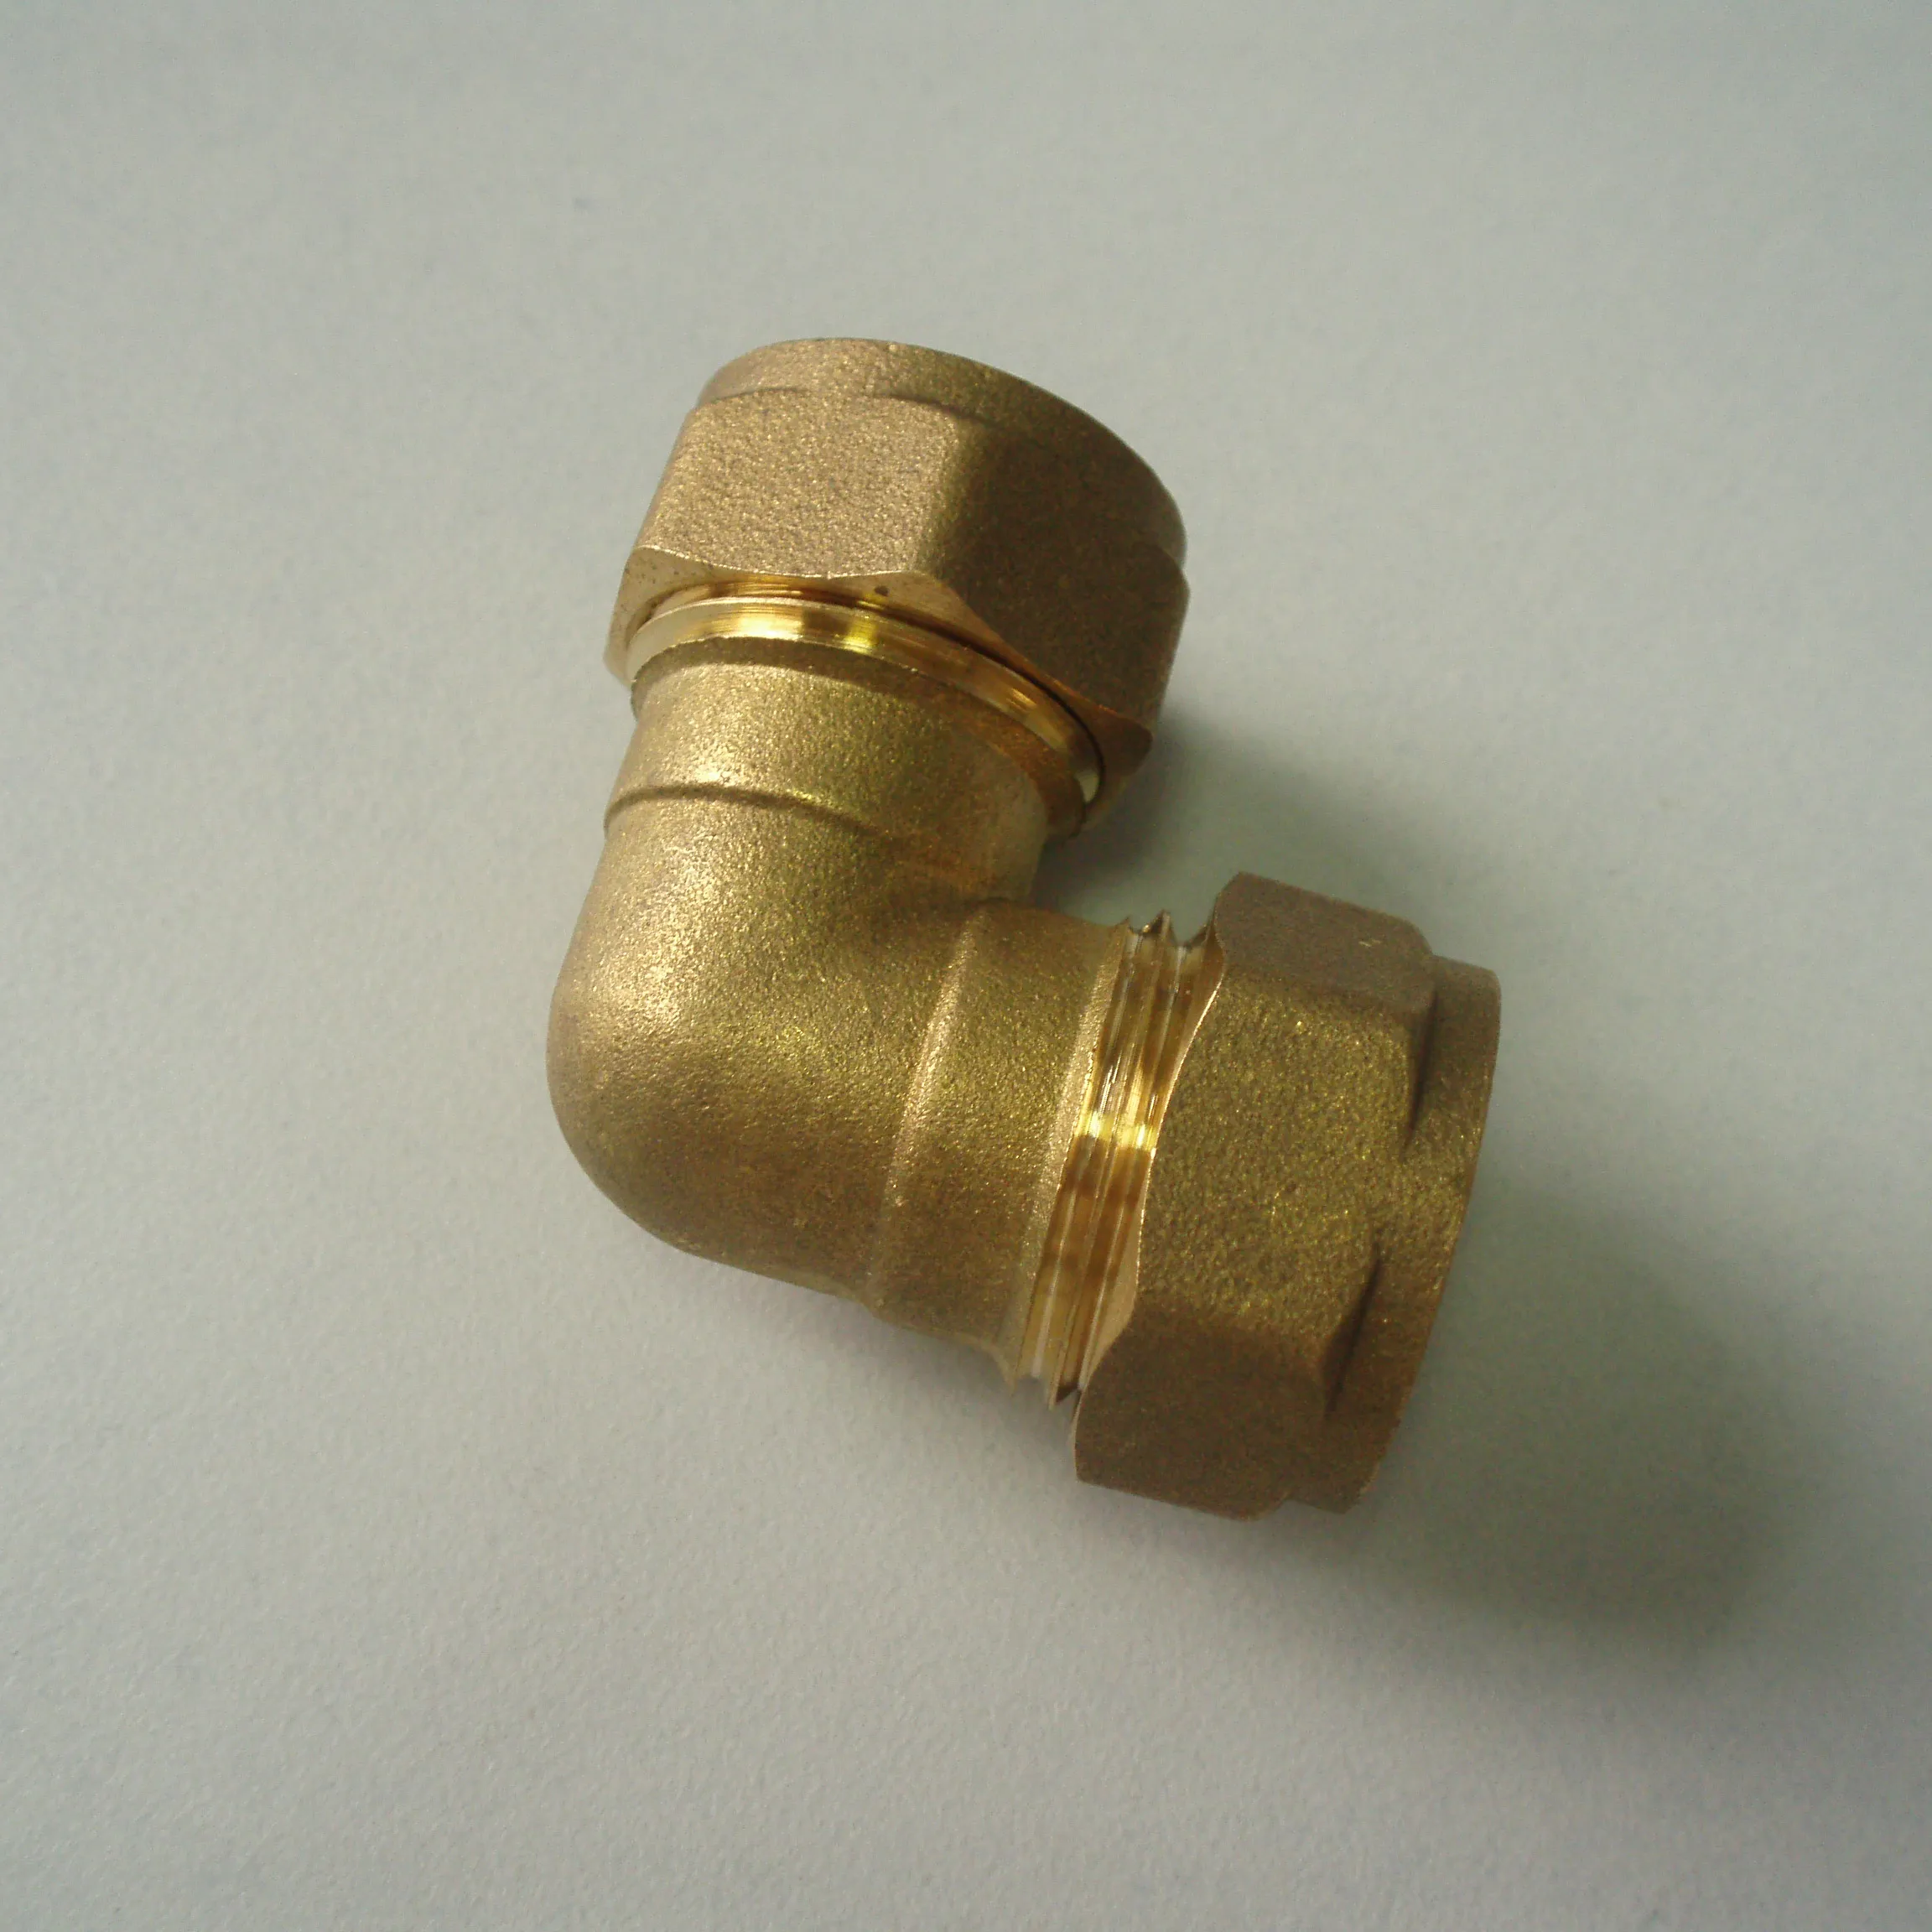 factory outlet Copper Pipe Brass Compression series refrigeration fittings include union, elbow and Tee